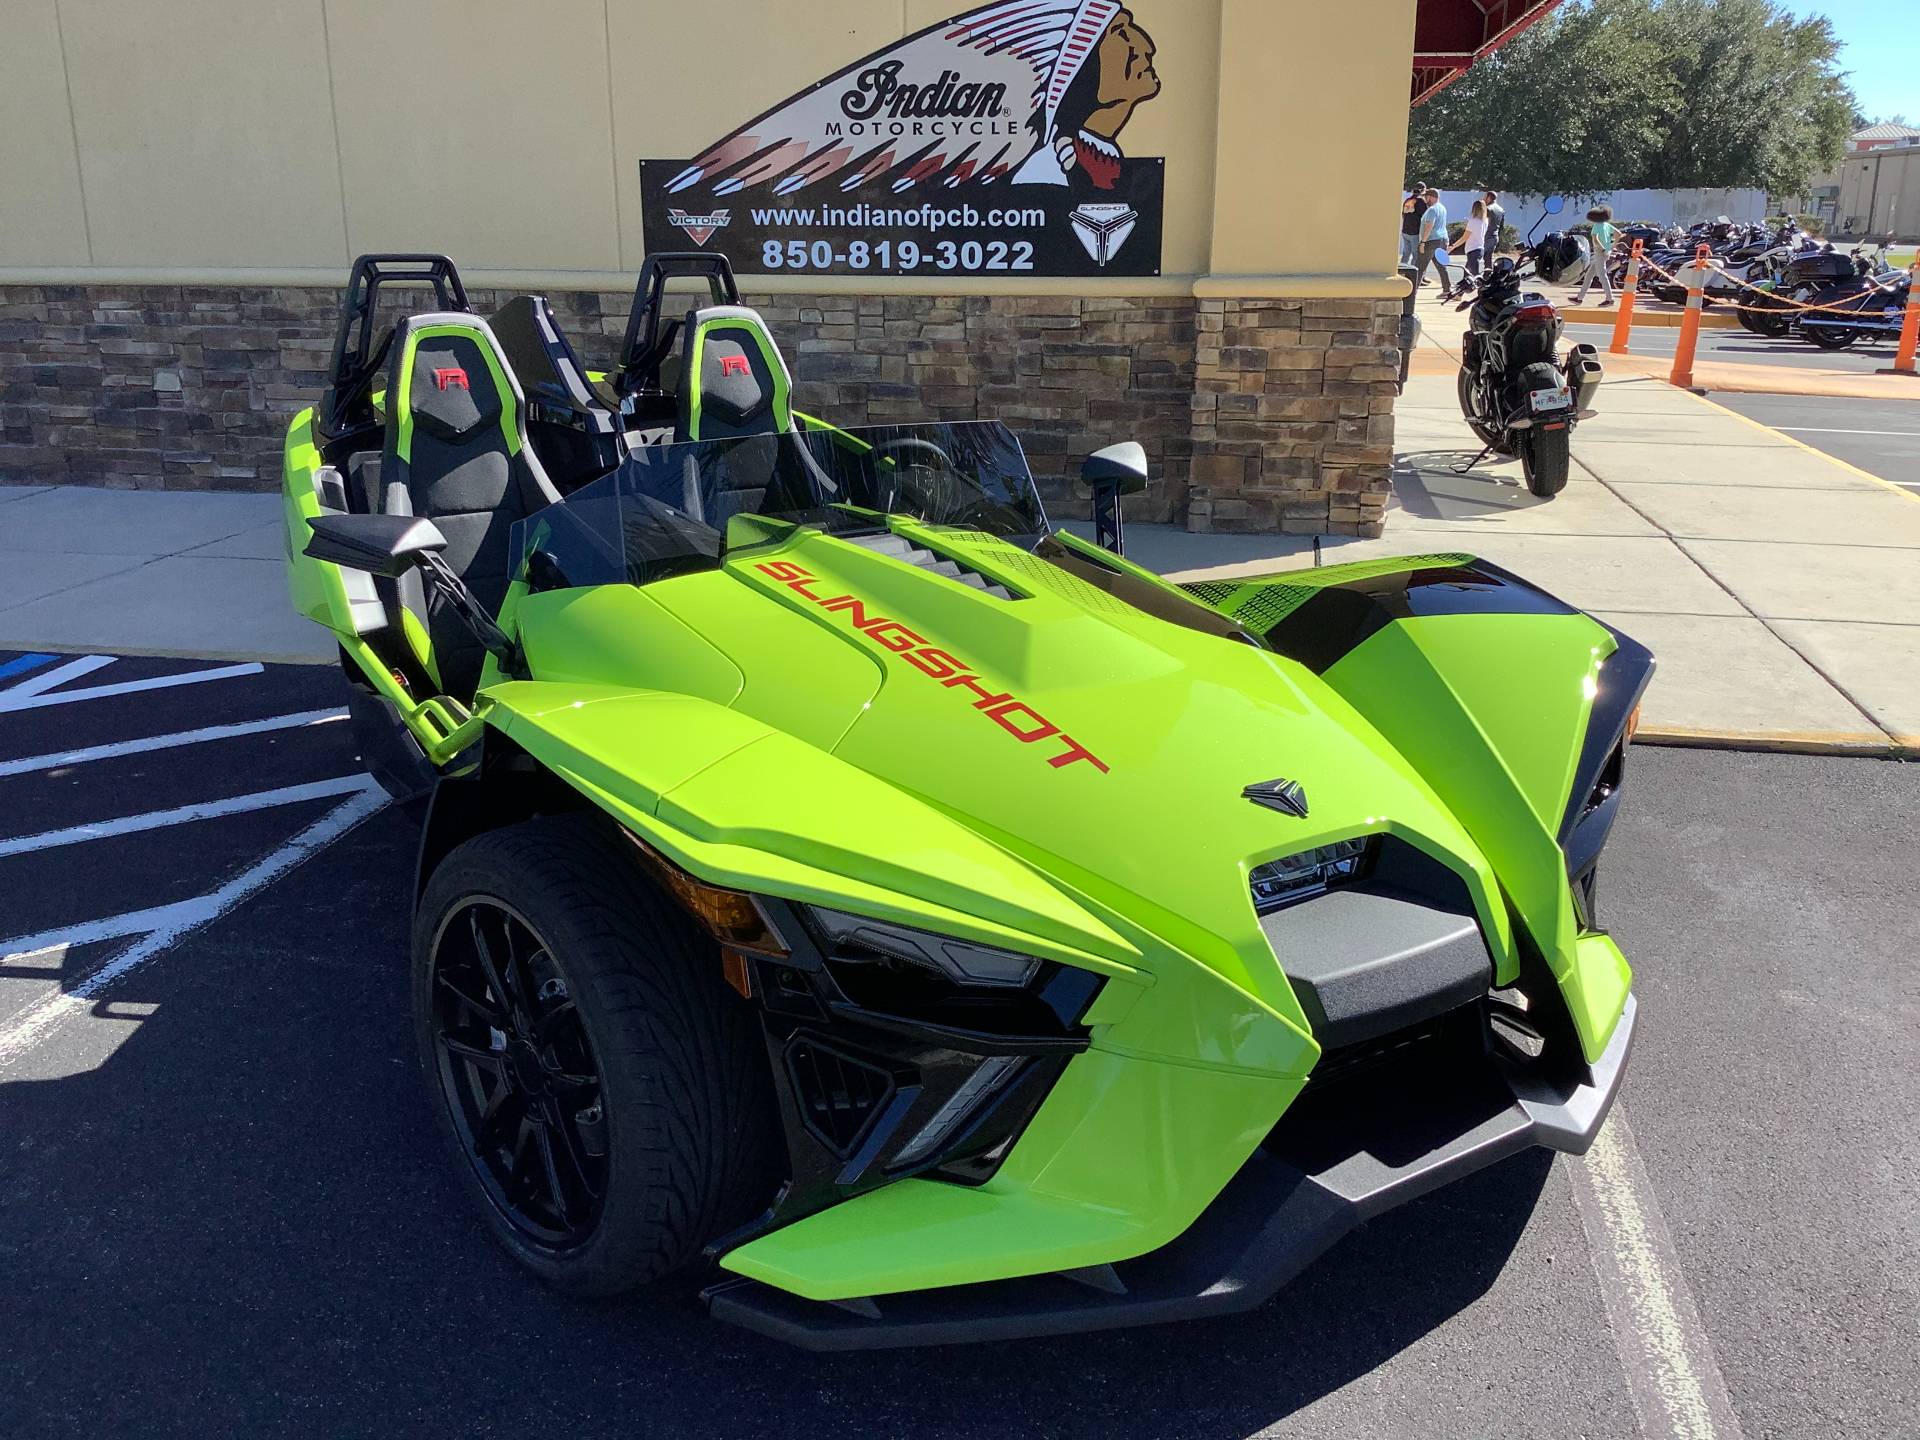 A view of the Polaris Slingshot - a vehicle that has been reclassified as an attocycle for the road of New York